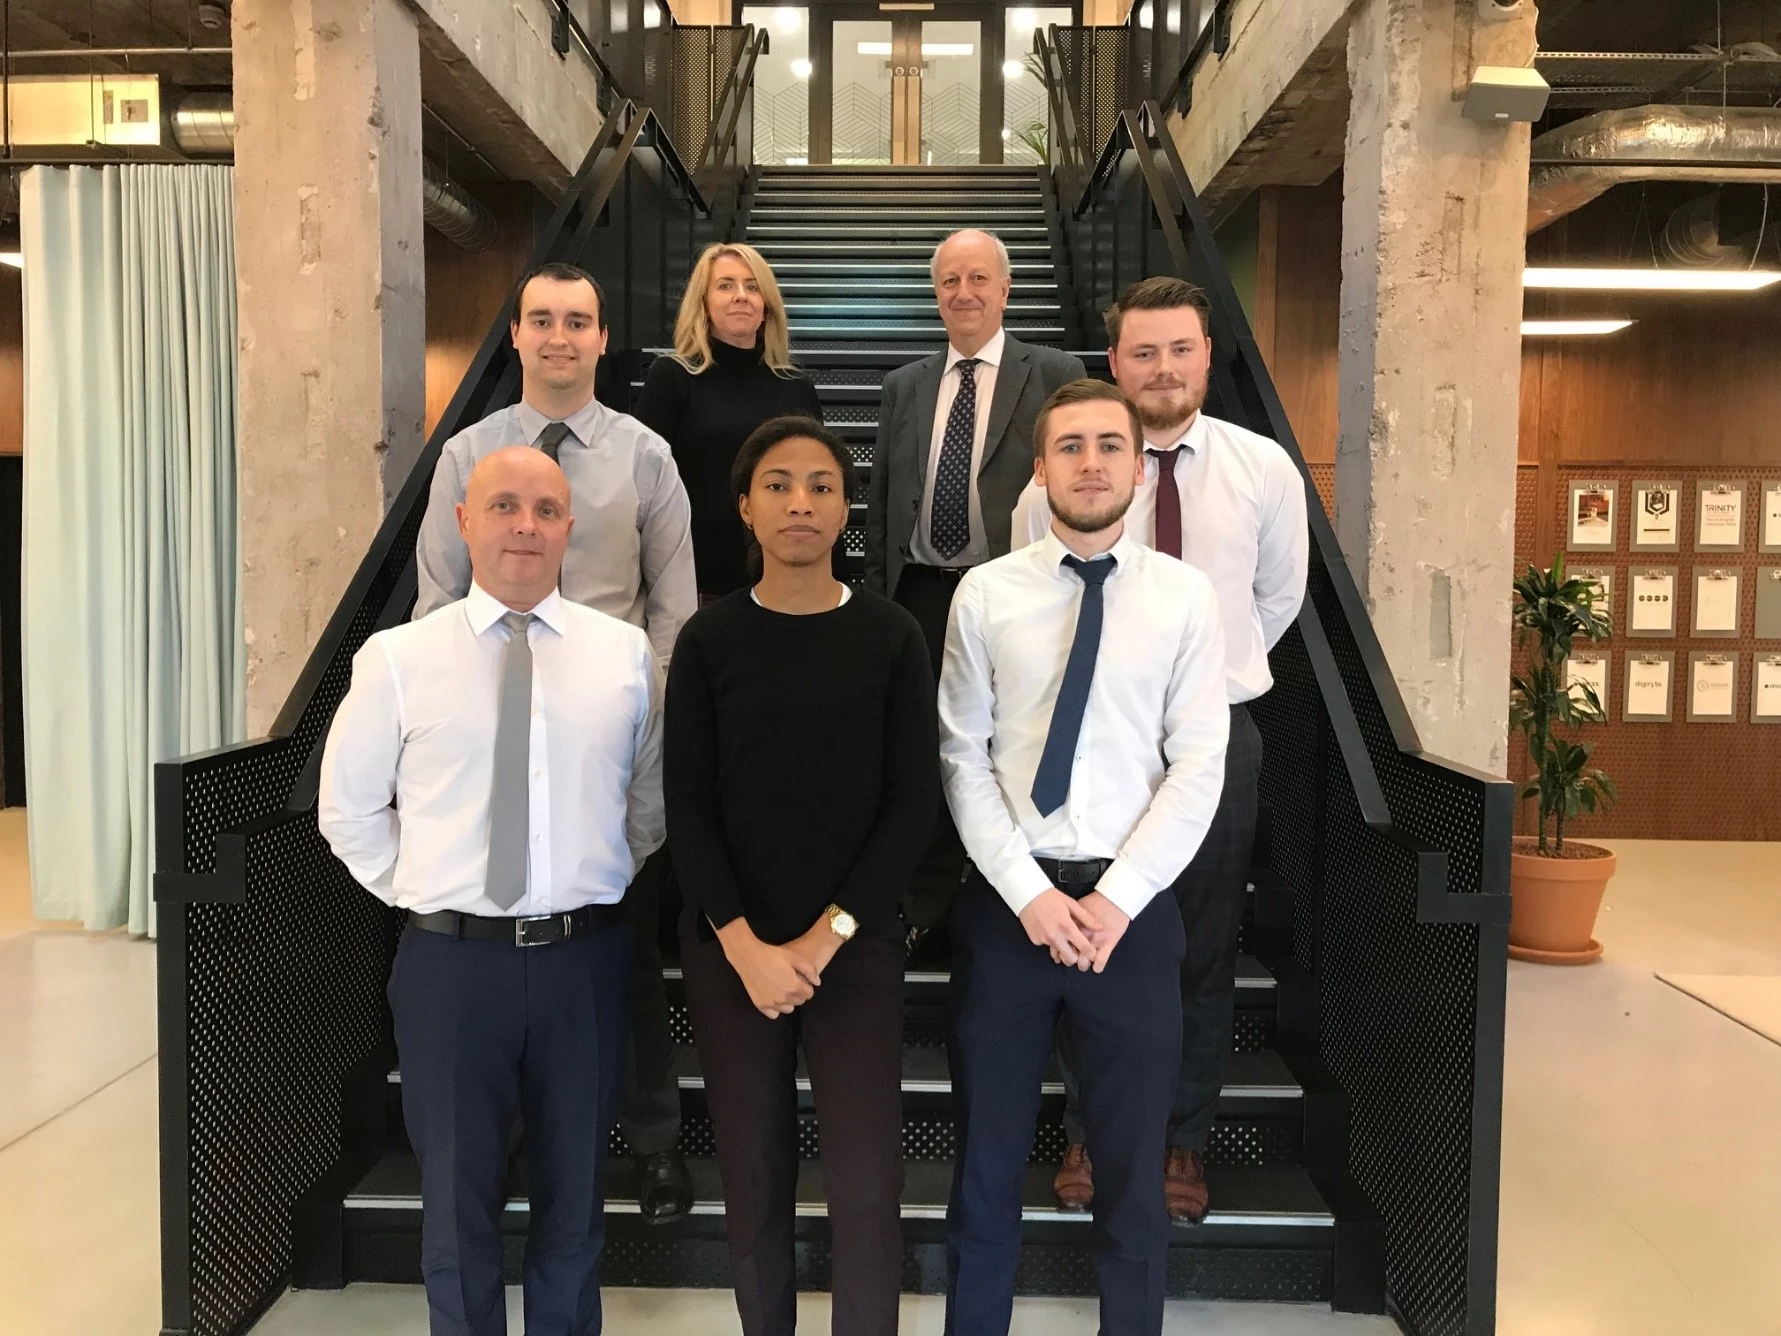 Service Delivery Manager, Kelly White, and David Singleton, Regional Manager for England and Wales at Edge Testing, with a team of new recruits in the new Manchester Digital Testing Hub